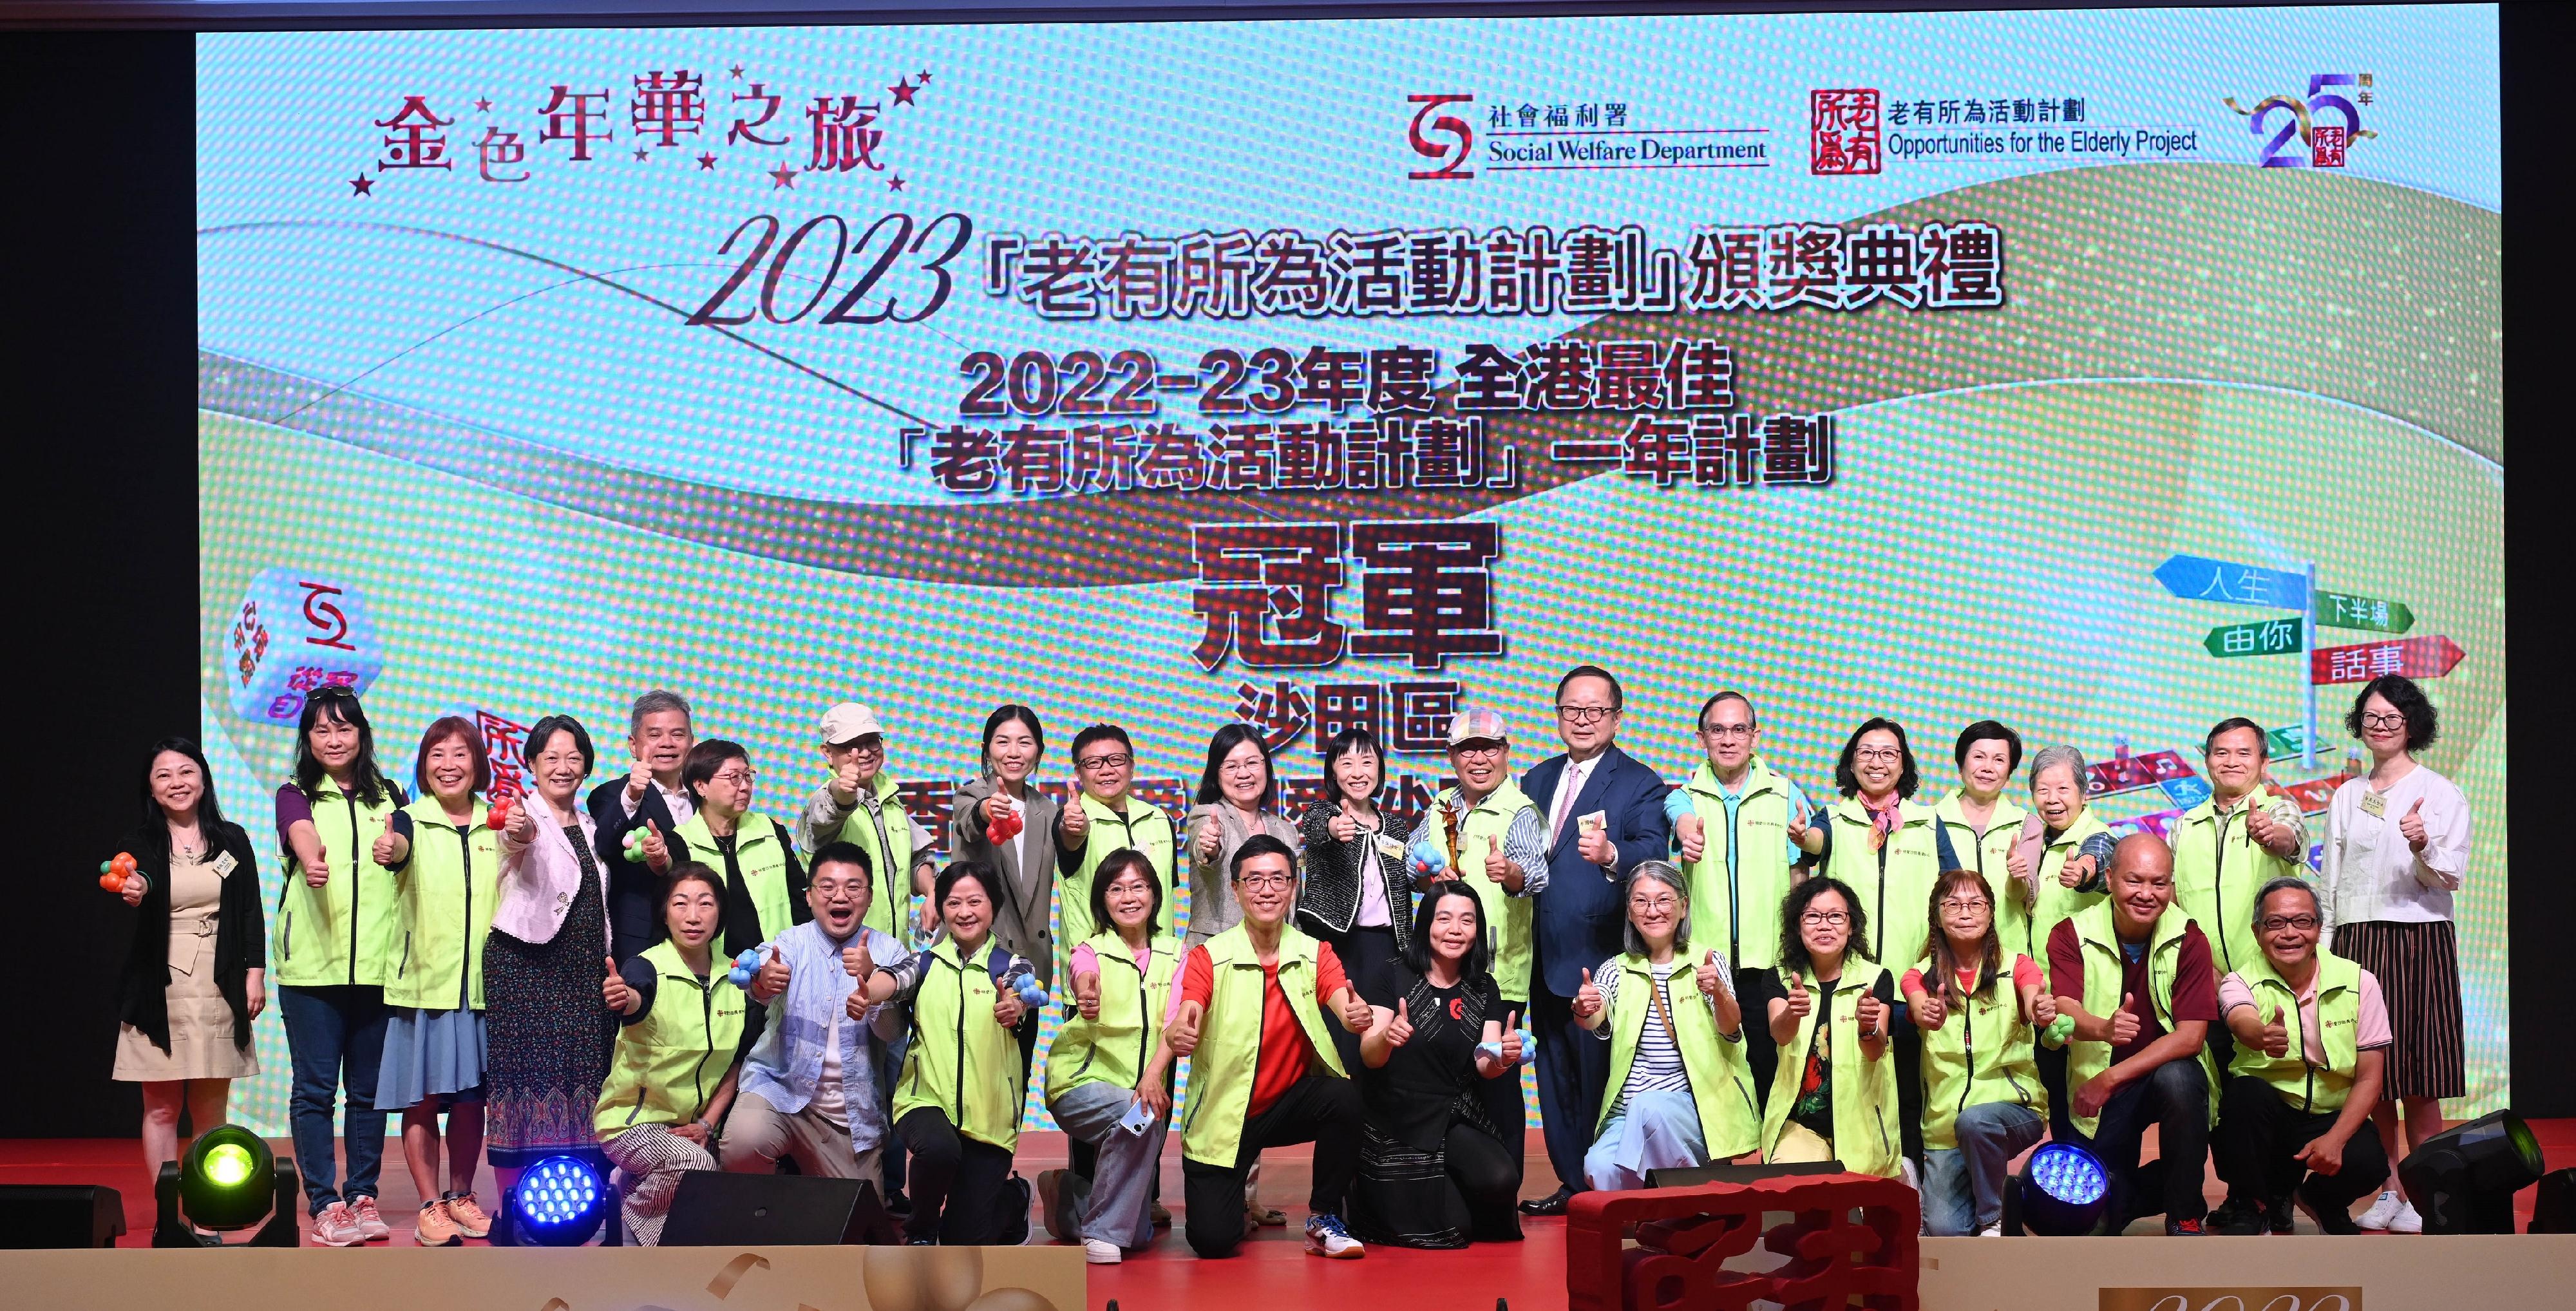 The Social Welfare Department today (November 1) held the 2023 Award Presentation Ceremony of the Opportunities for the Elderly Project (OEP). Photo shows the Director of Social Welfare, Miss Charmaine Lee (back row, ninth right); the Chairman of the Elderly Commission, Dr Donald Li (back row, seventh right); and the Chairman of the OEP Advisory Committee, Professor Diana Lee (back row, 10th left), with representatives of Caritas Elderly Centre - Shatin which was awarded the Championship of the Hong Kong Best OEP Award for one-year projects.